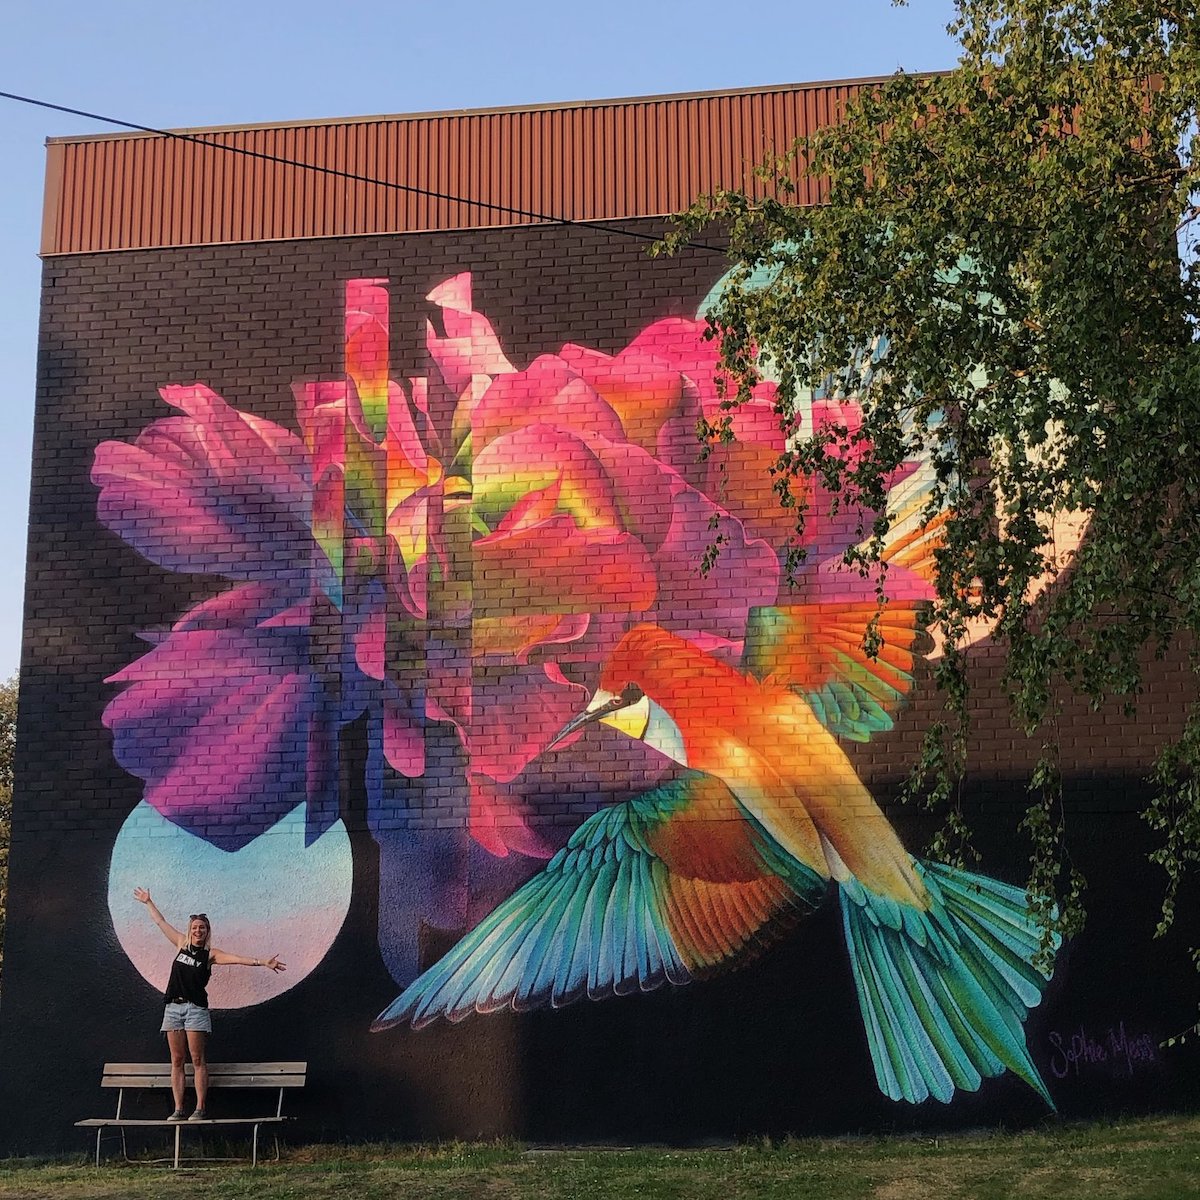 Flower Murals by Sophie Mess